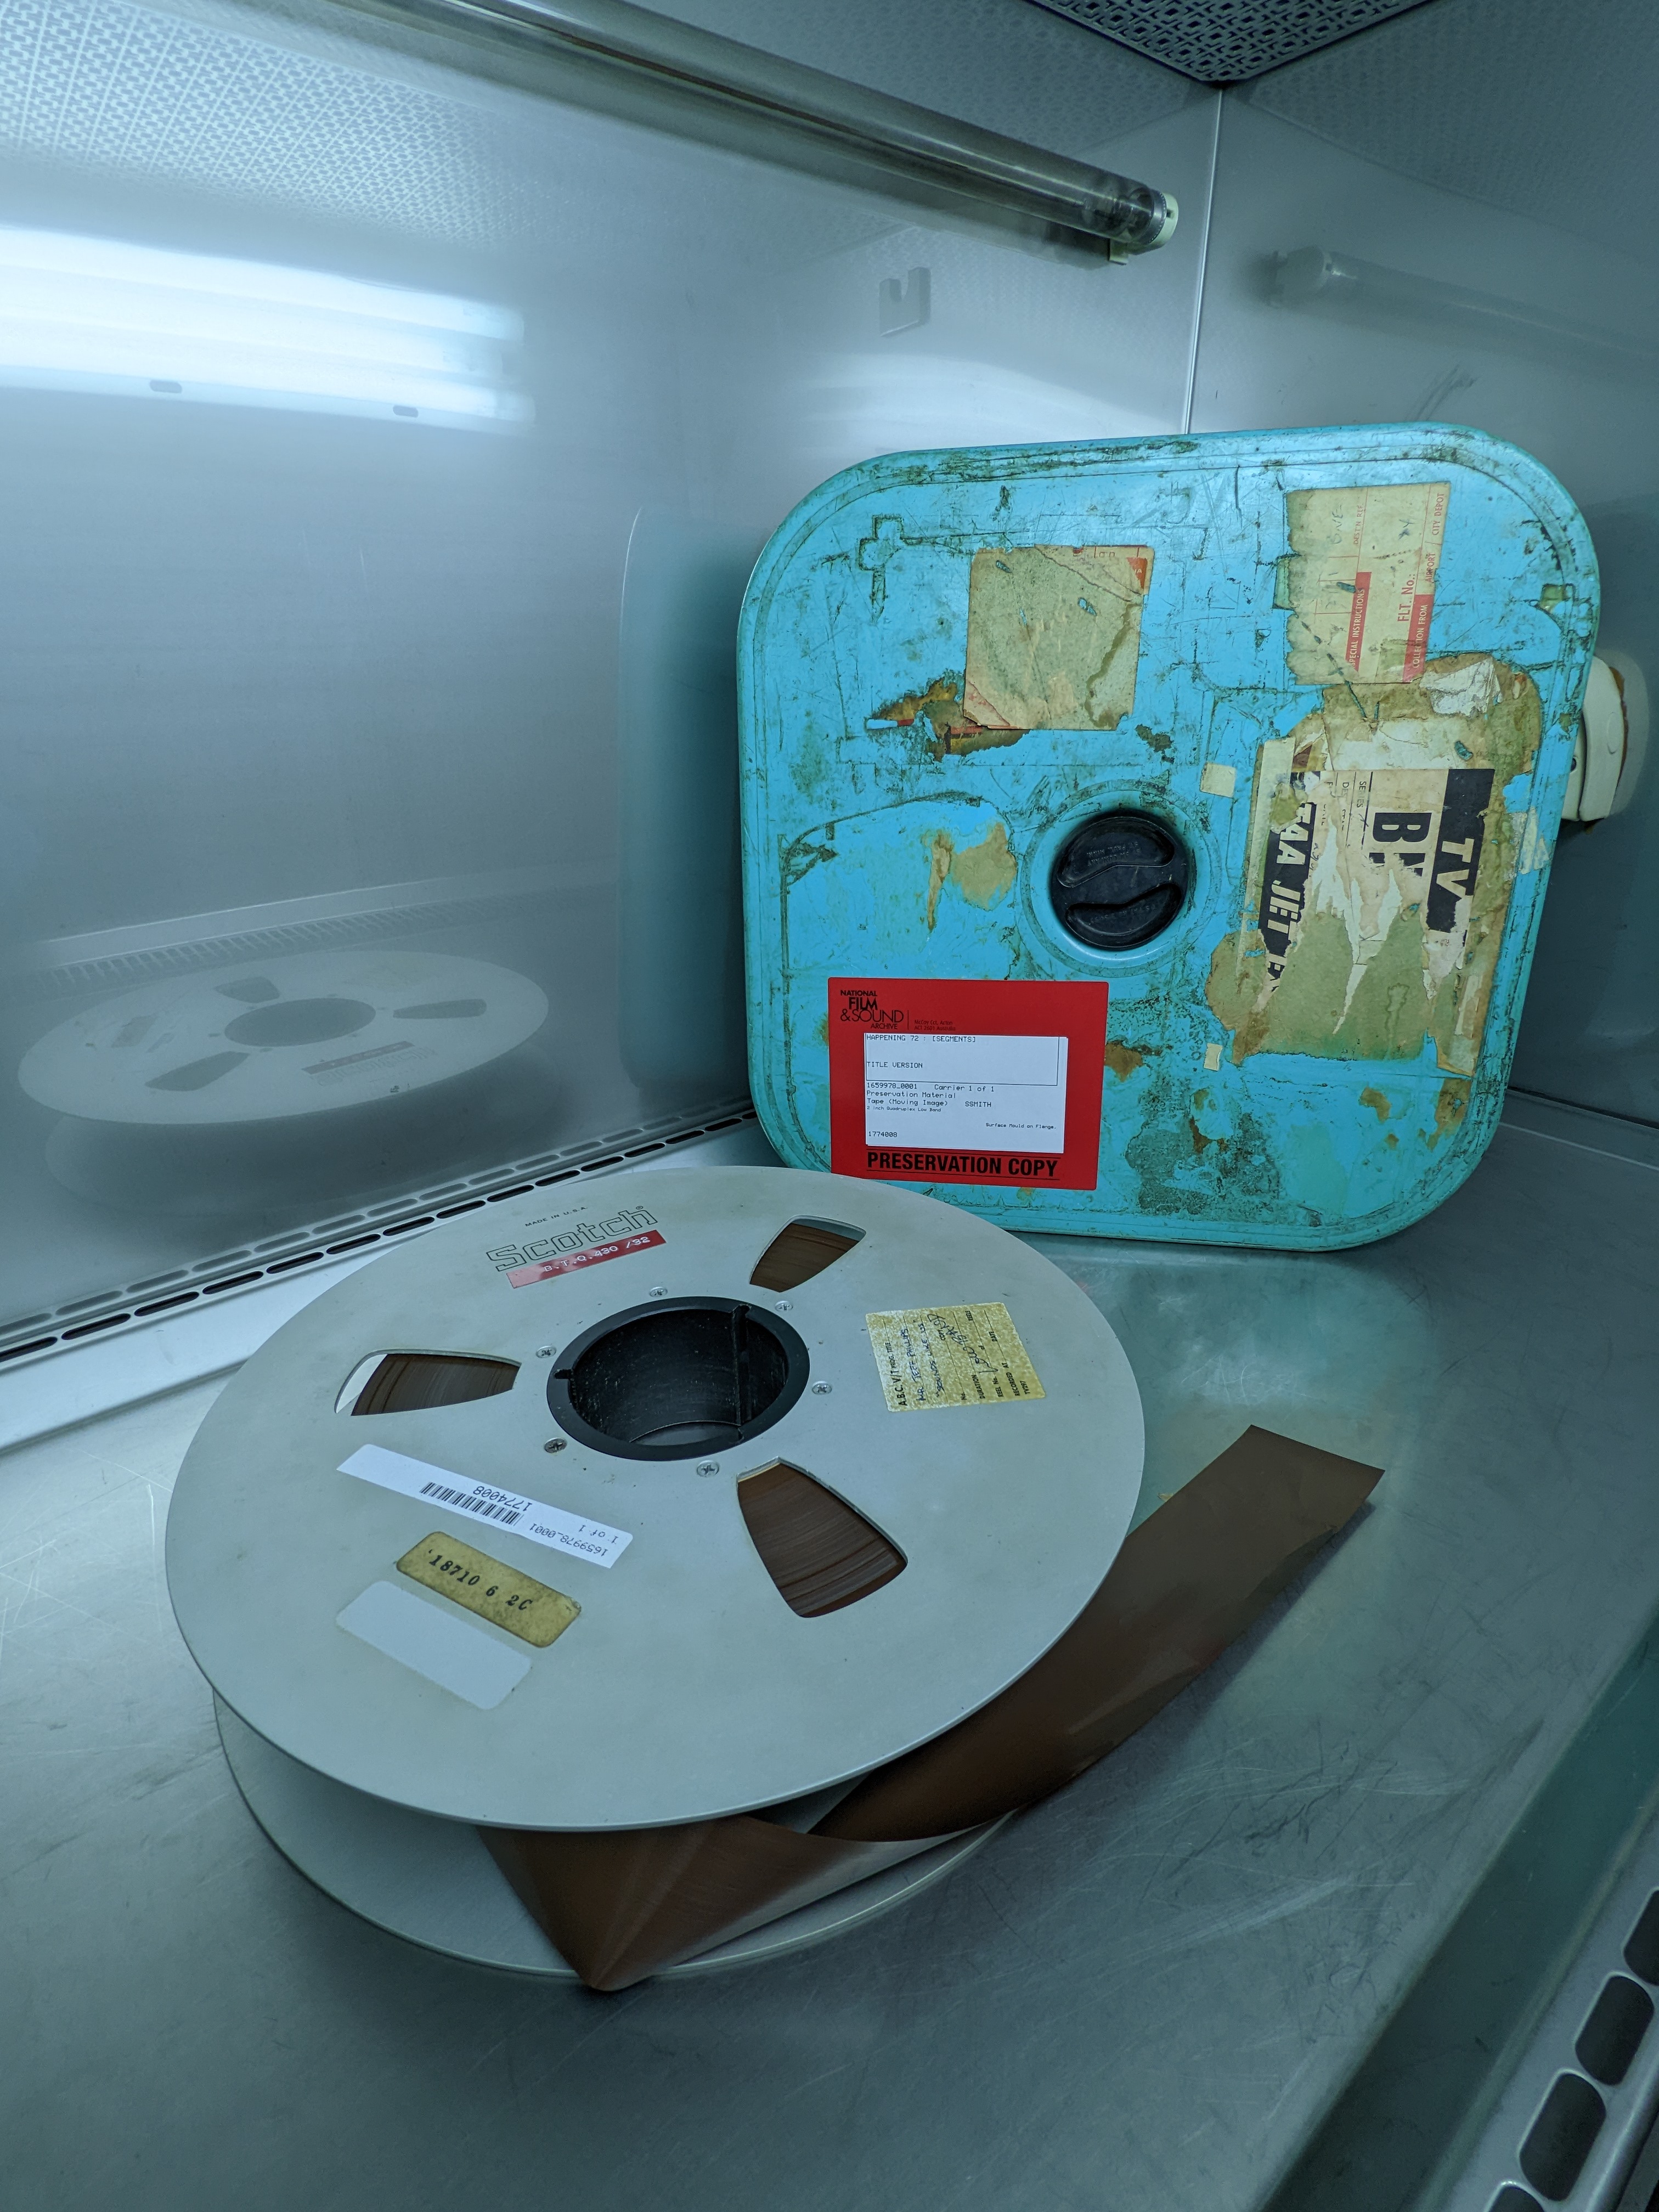 A two-inch reel lying beside a battered, upright case with a bright red label.